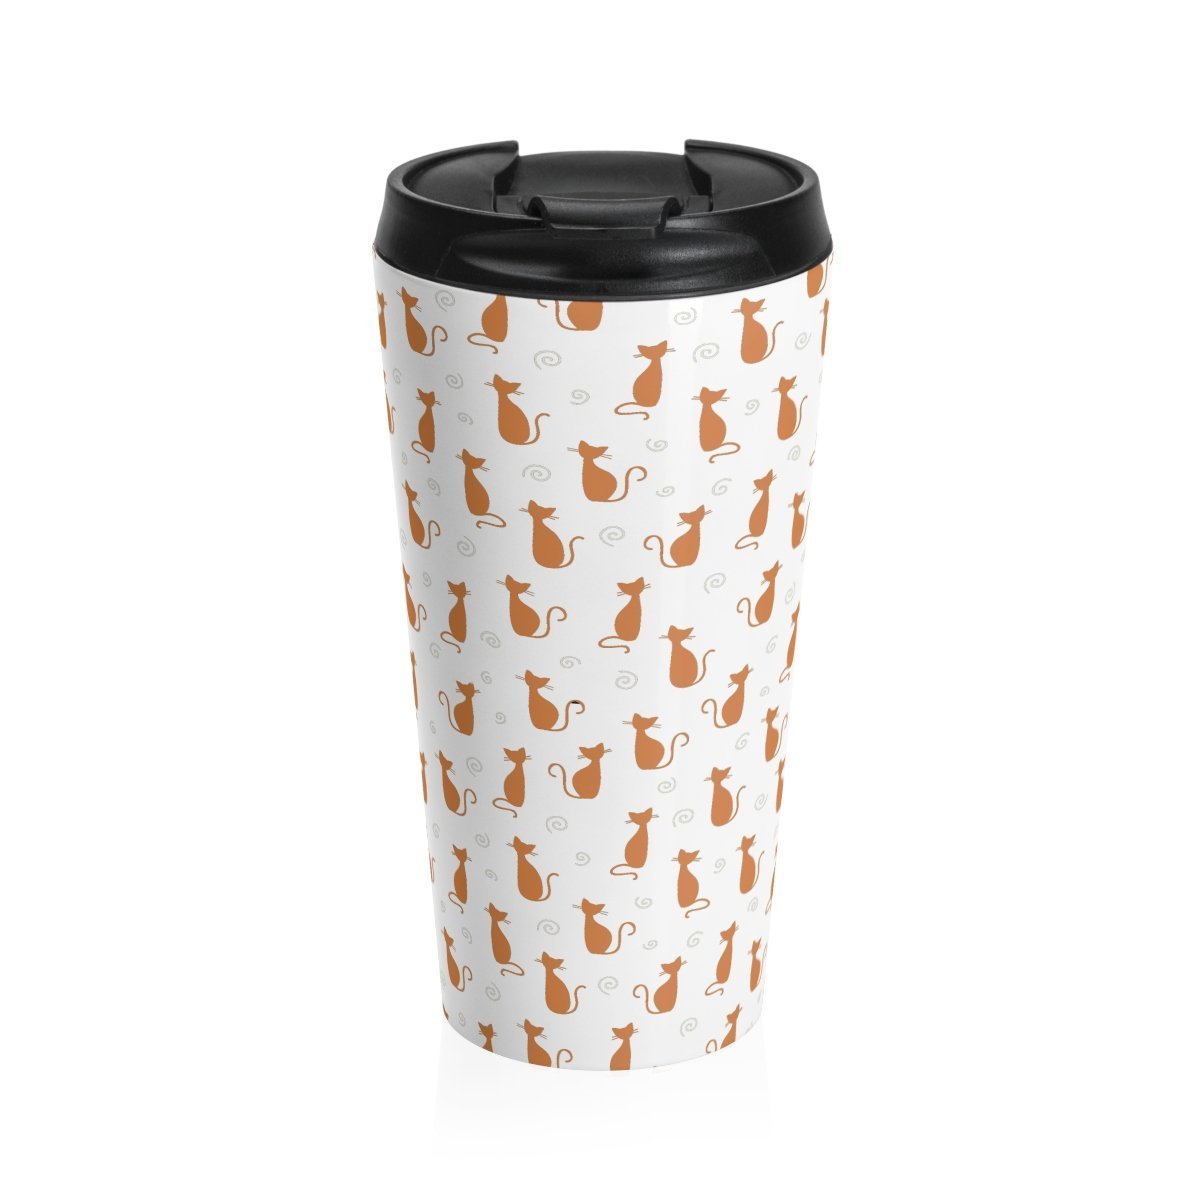 This stainless steel cat travel mug is decorated with orange cats on a white background and is inspired by the cute spots of calico cats.